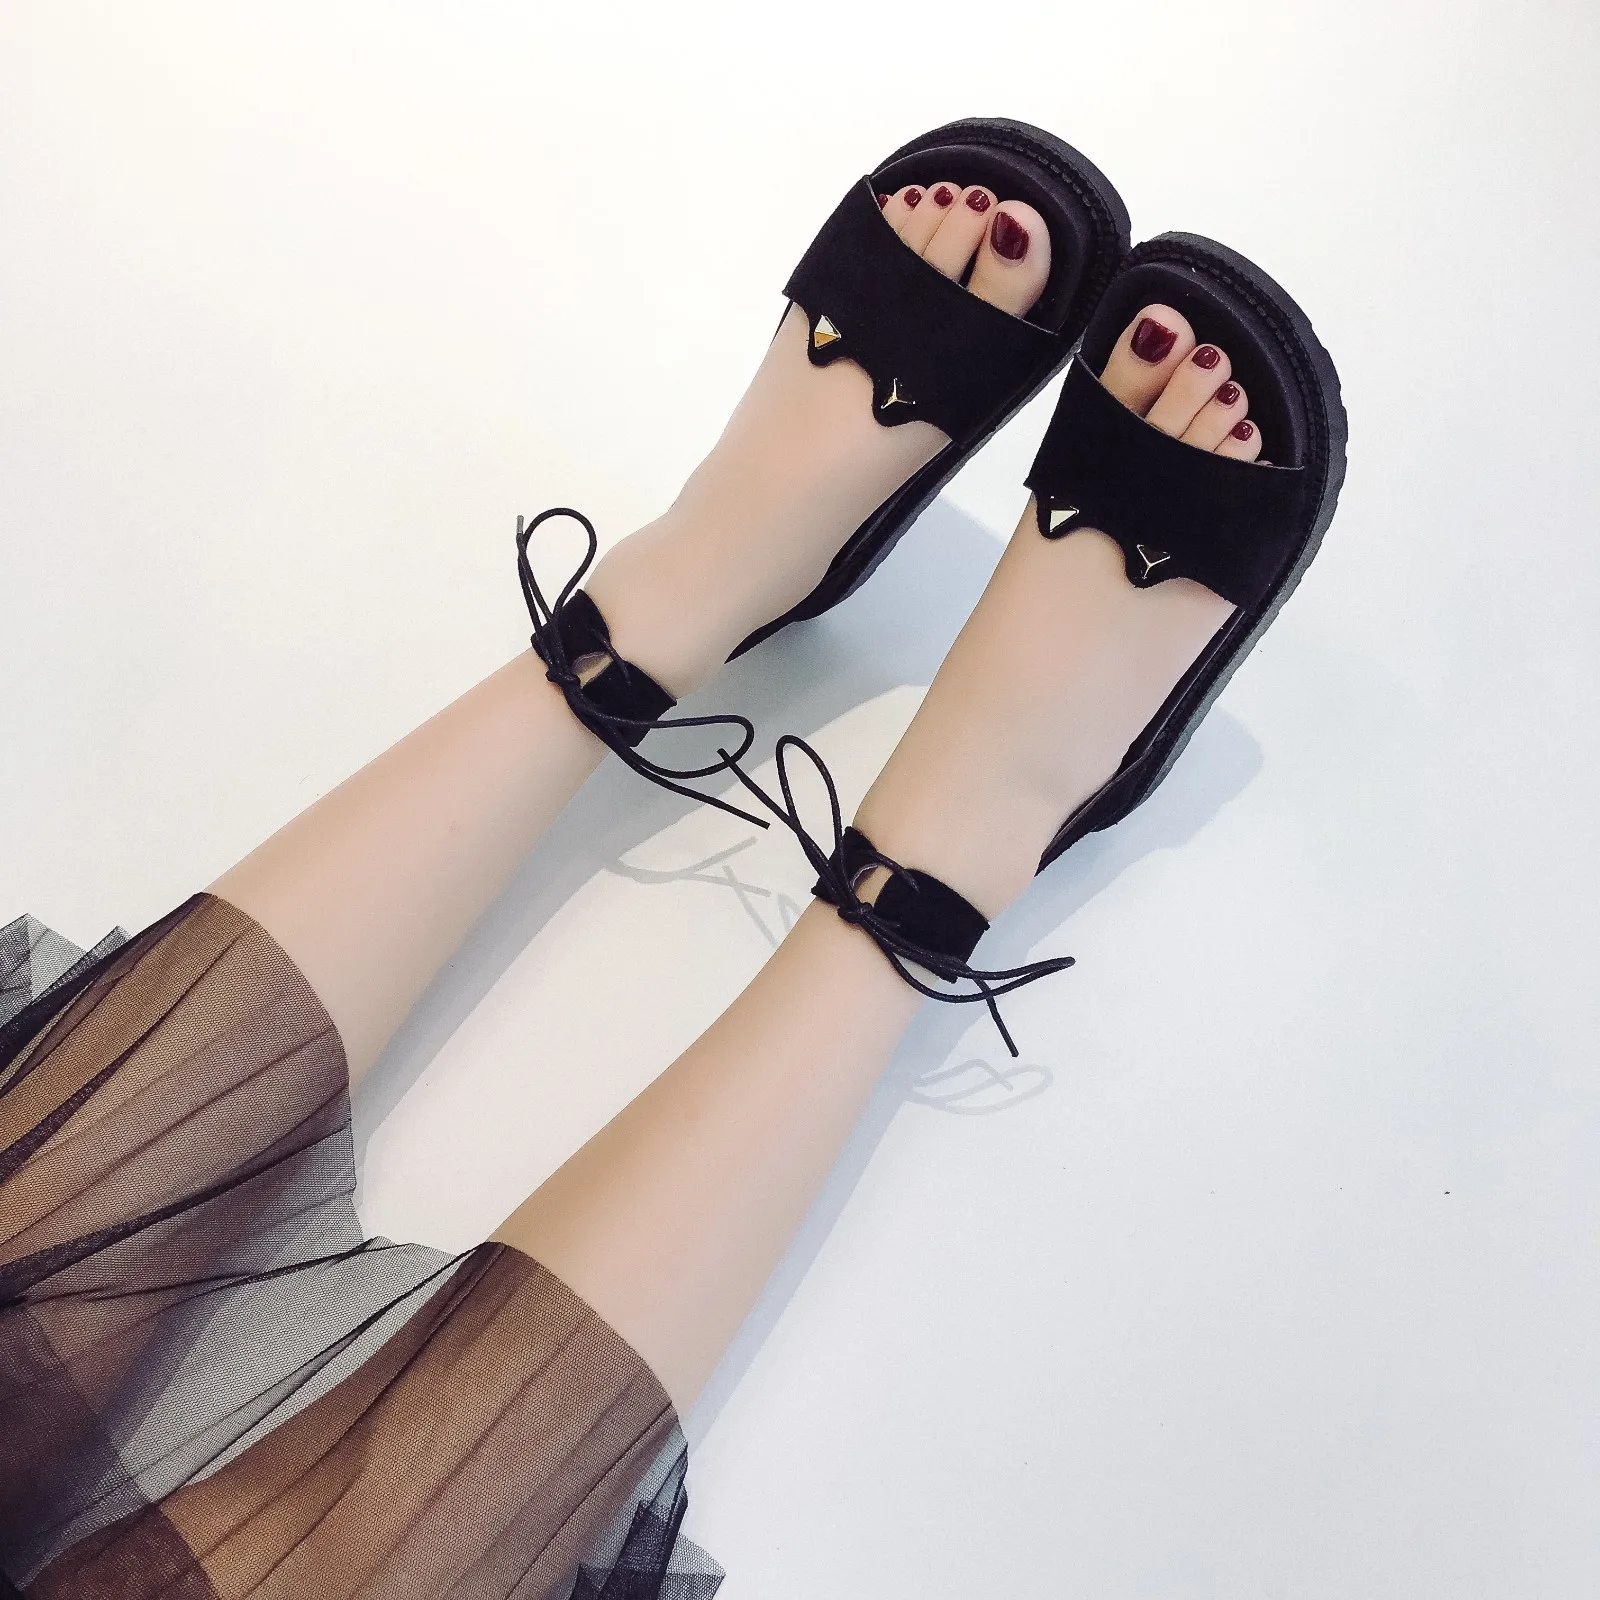 

All-Match Comfort Shoes for Women Breathable Beige Heeled Sandals Open Toe 2021 Summer Black Flat Girls Lace Up Low New Peep Rom